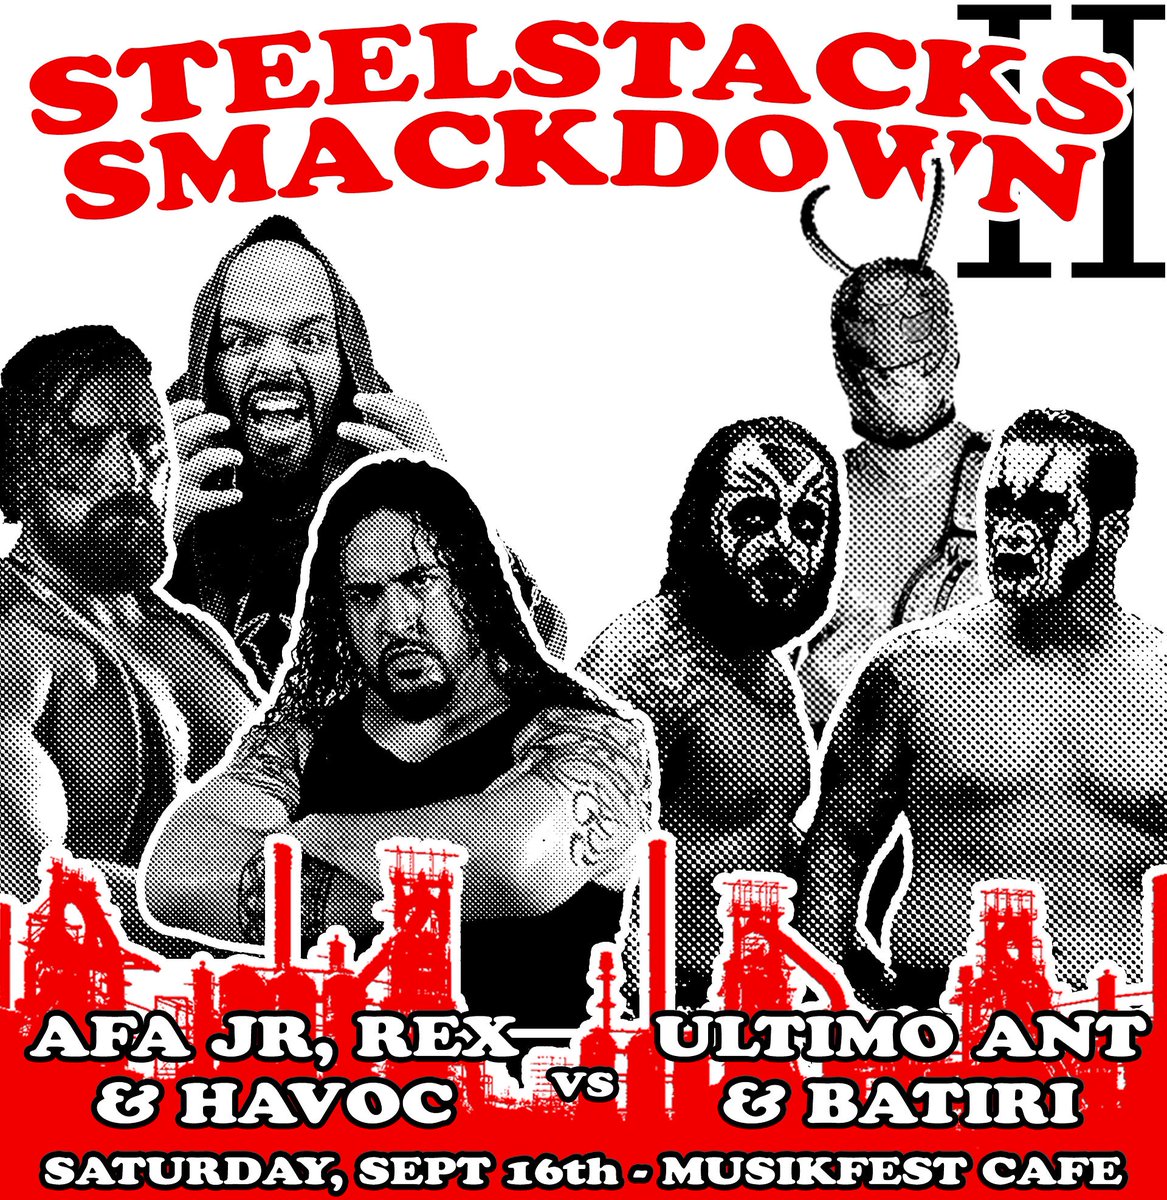 “The pectoral Poseidon, the Samoan storm, & the bearded menace walk into steelstacks” sounds like the setup for a punchline, but a trios match against experienced tag team wrestlers like @TheBatiri & @ultimo_ant is no joke! Get your tickets today at STEELSTACKS.ORG